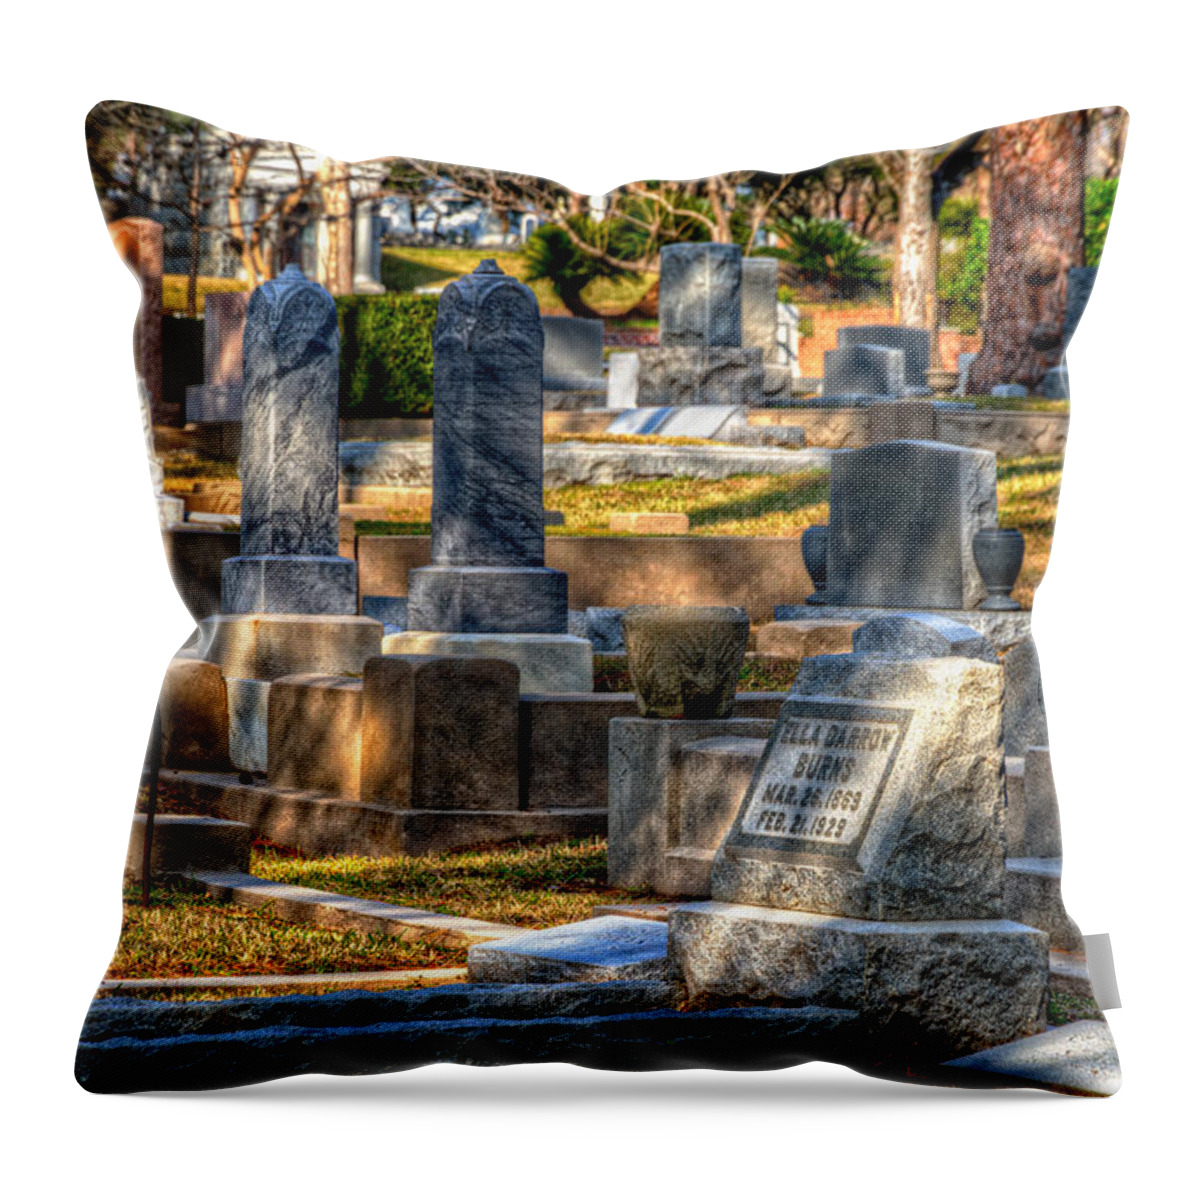 Tim Stanley Throw Pillow featuring the photograph Stone Works by Tim Stanley